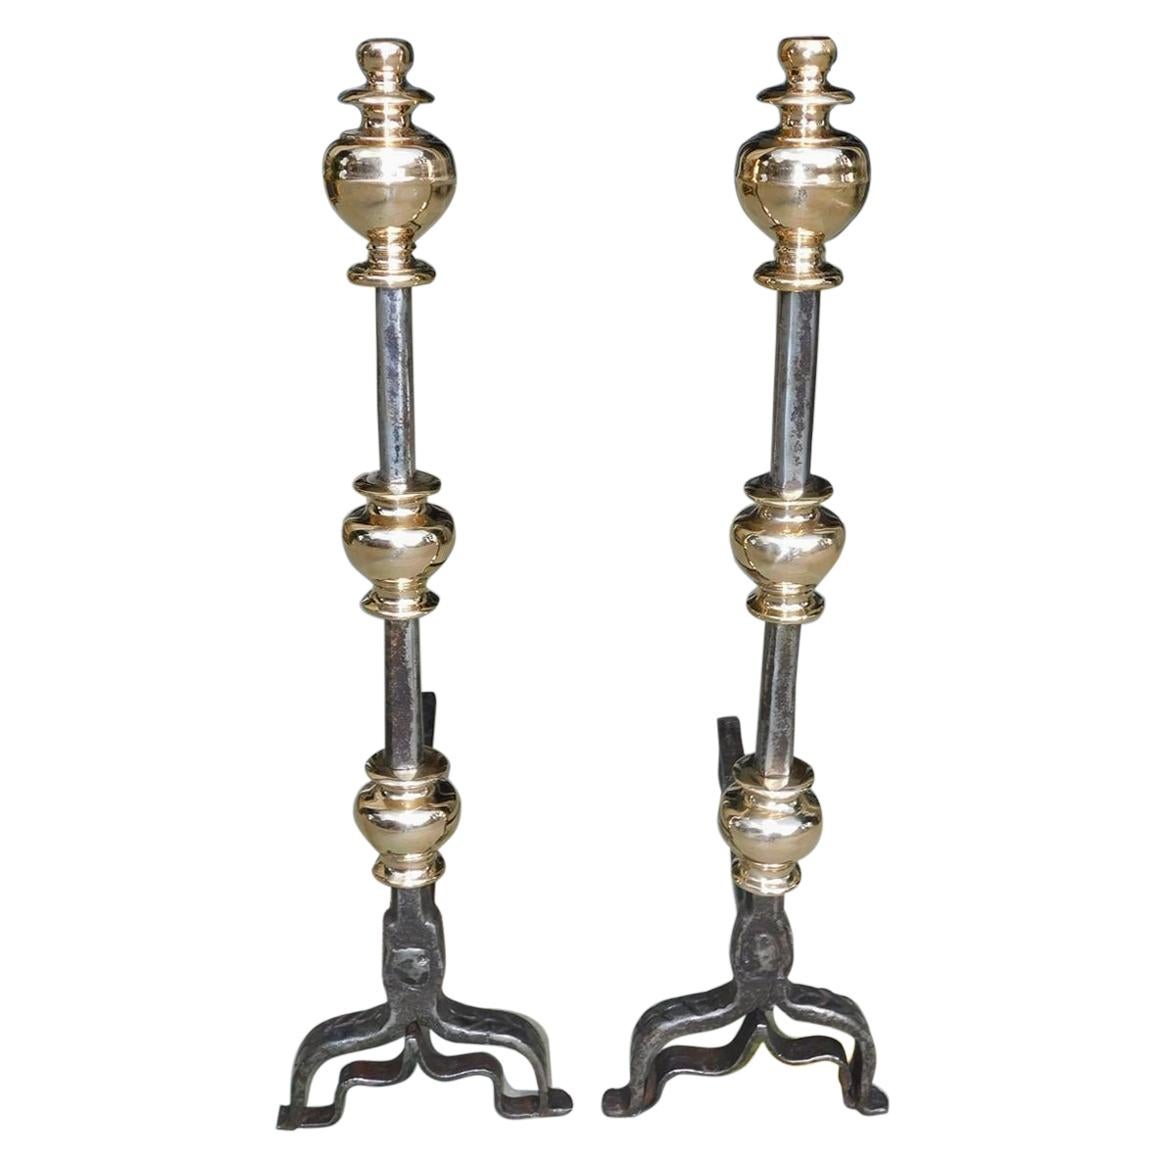 Pair of English Brass and Polished Steel Urn Finial Fire Place Andirons, C. 1780